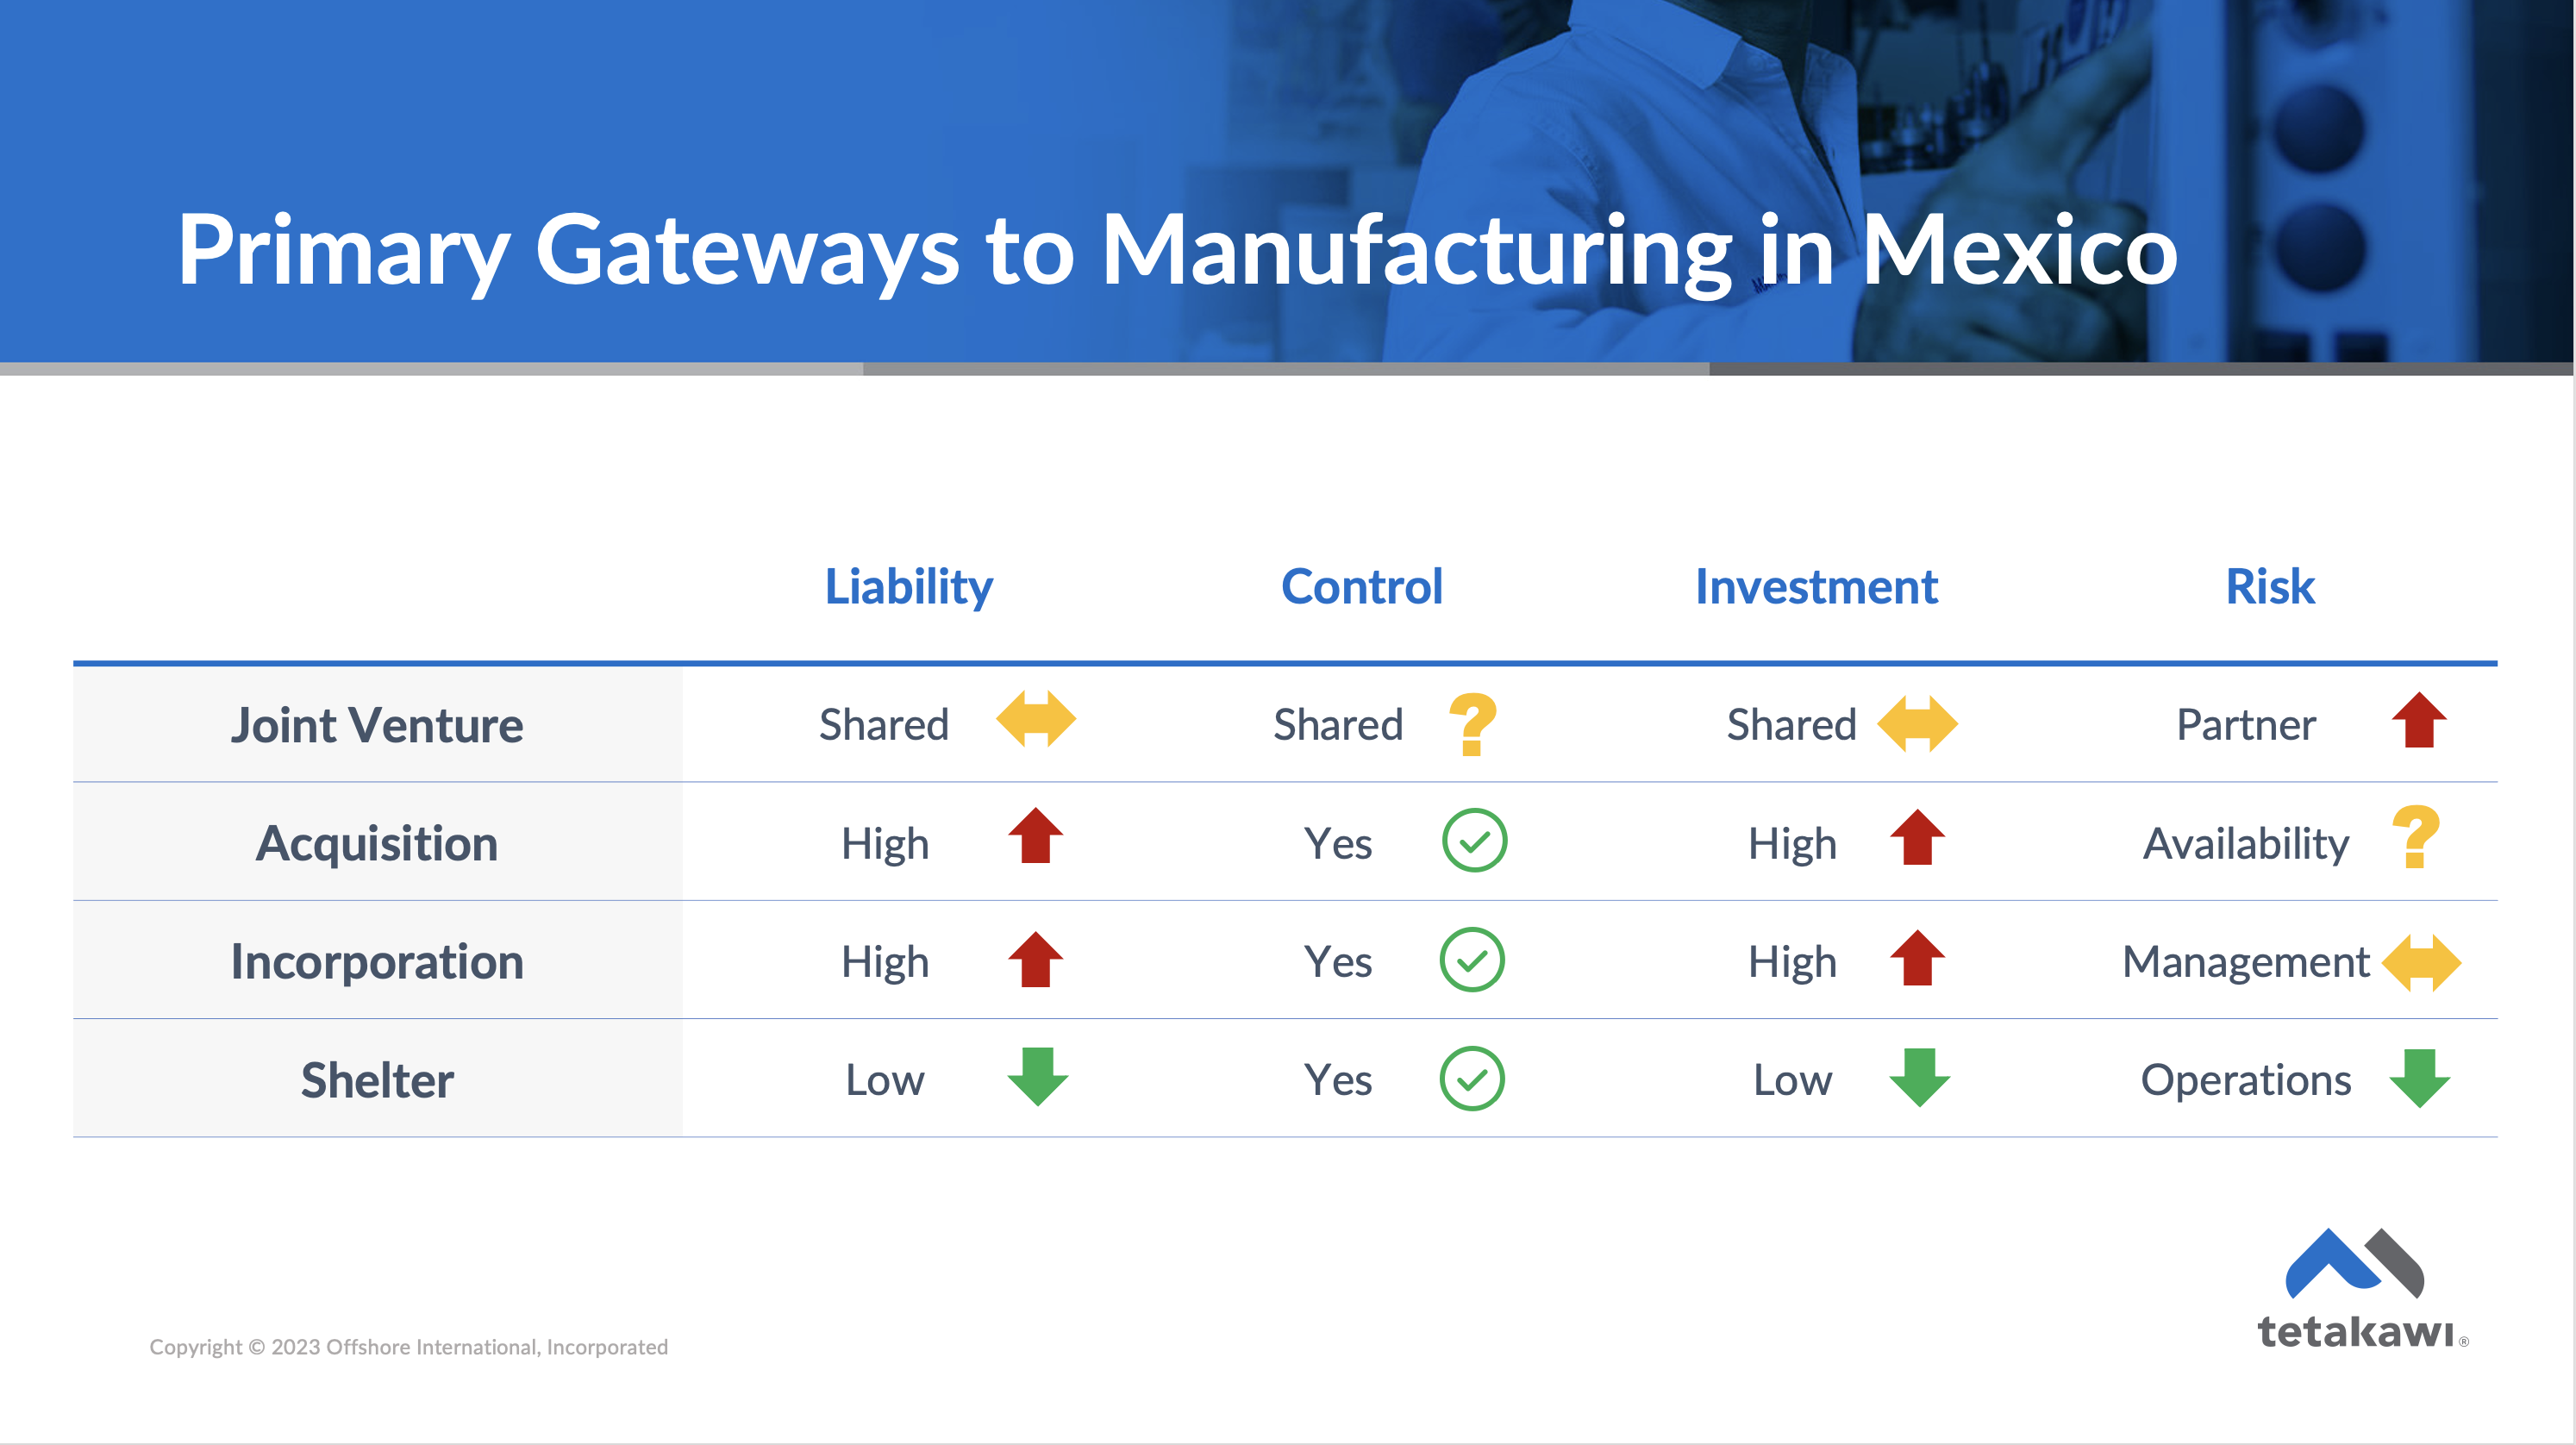 Modes of entry for manufacturing in Mexico